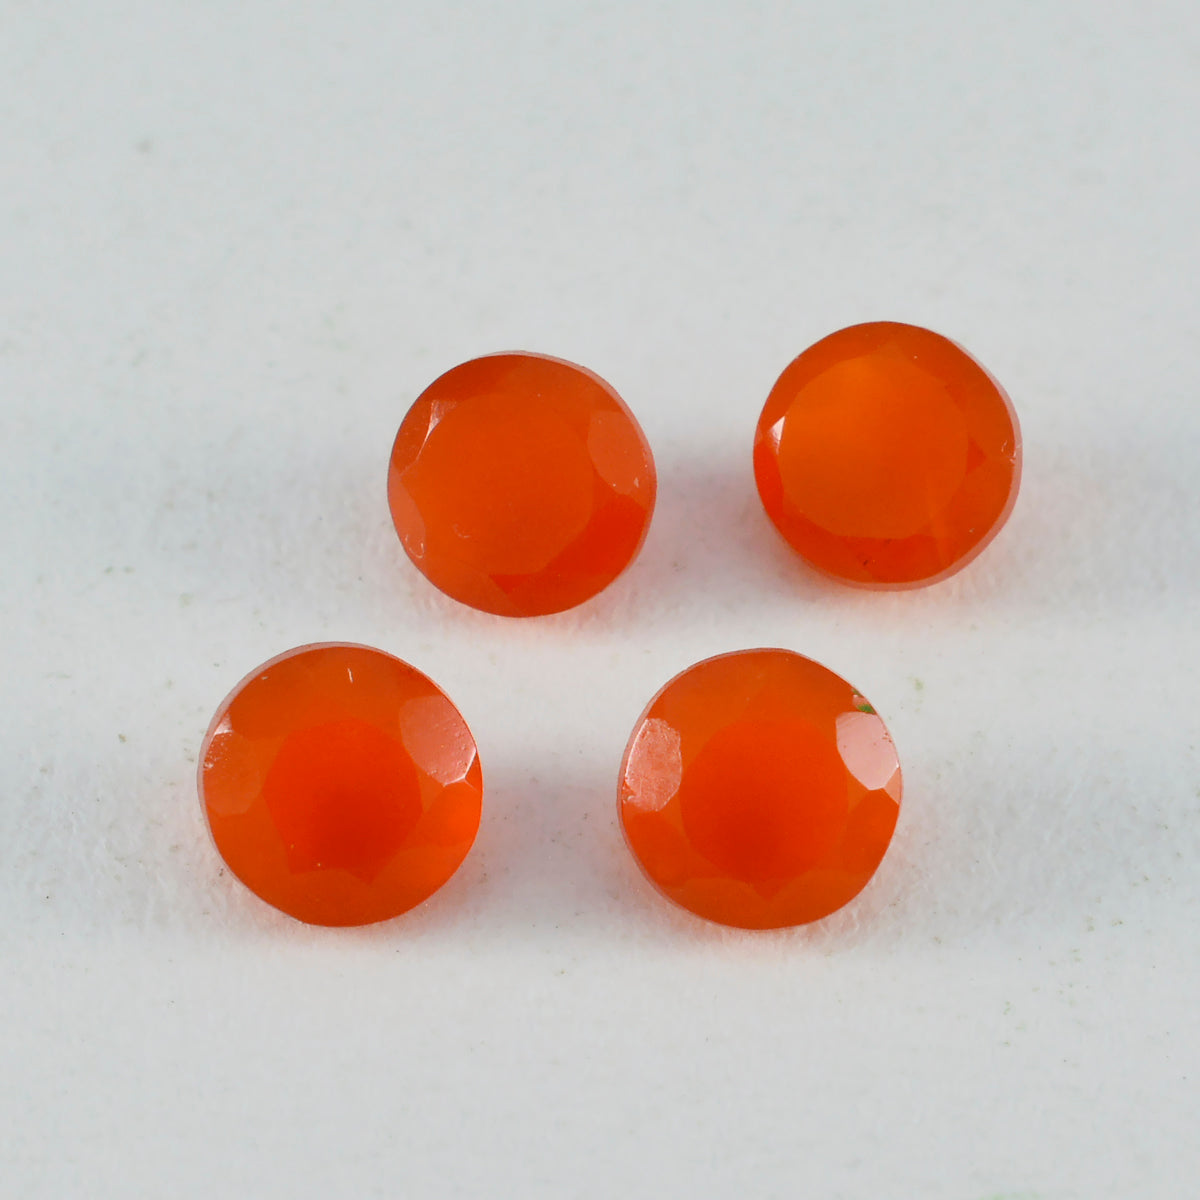 Riyogems 1PC Real Red Onyx Faceted 12x12 mm Round Shape attractive Quality Loose Gems